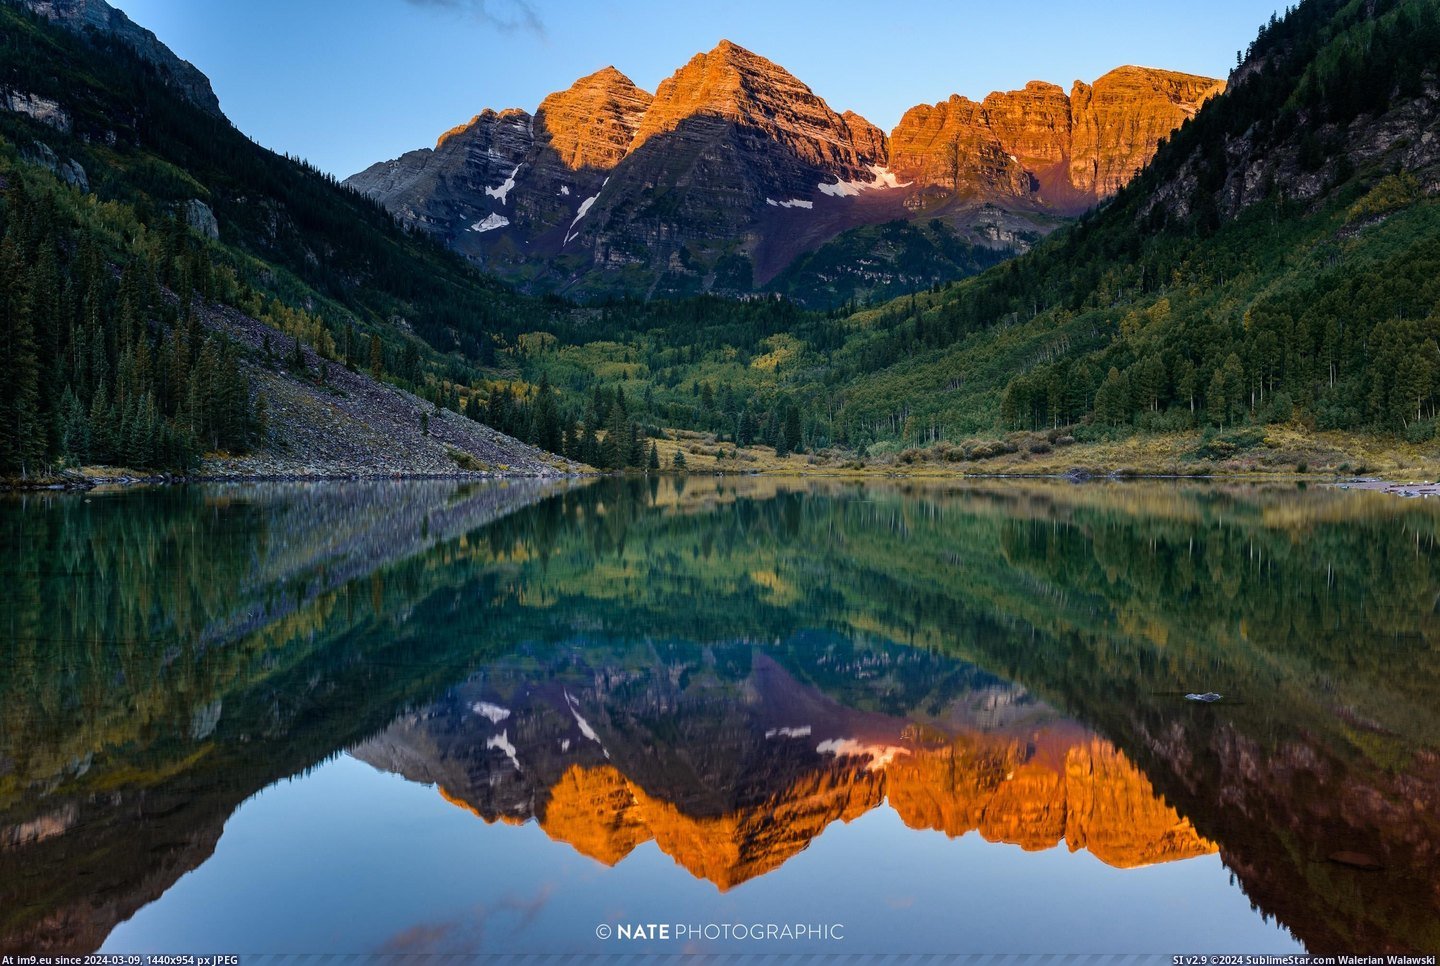 #Shots #Sunrise #Card #Maroon #Memory #Hiked #Battery #Died #Bells #Stranger [Earthporn] Hiked to Maroon Bells, CO for sunrise. Battery died. A stranger let me take a few shots with my memory card in his c Pic. (Obraz z album My r/EARTHPORN favs))